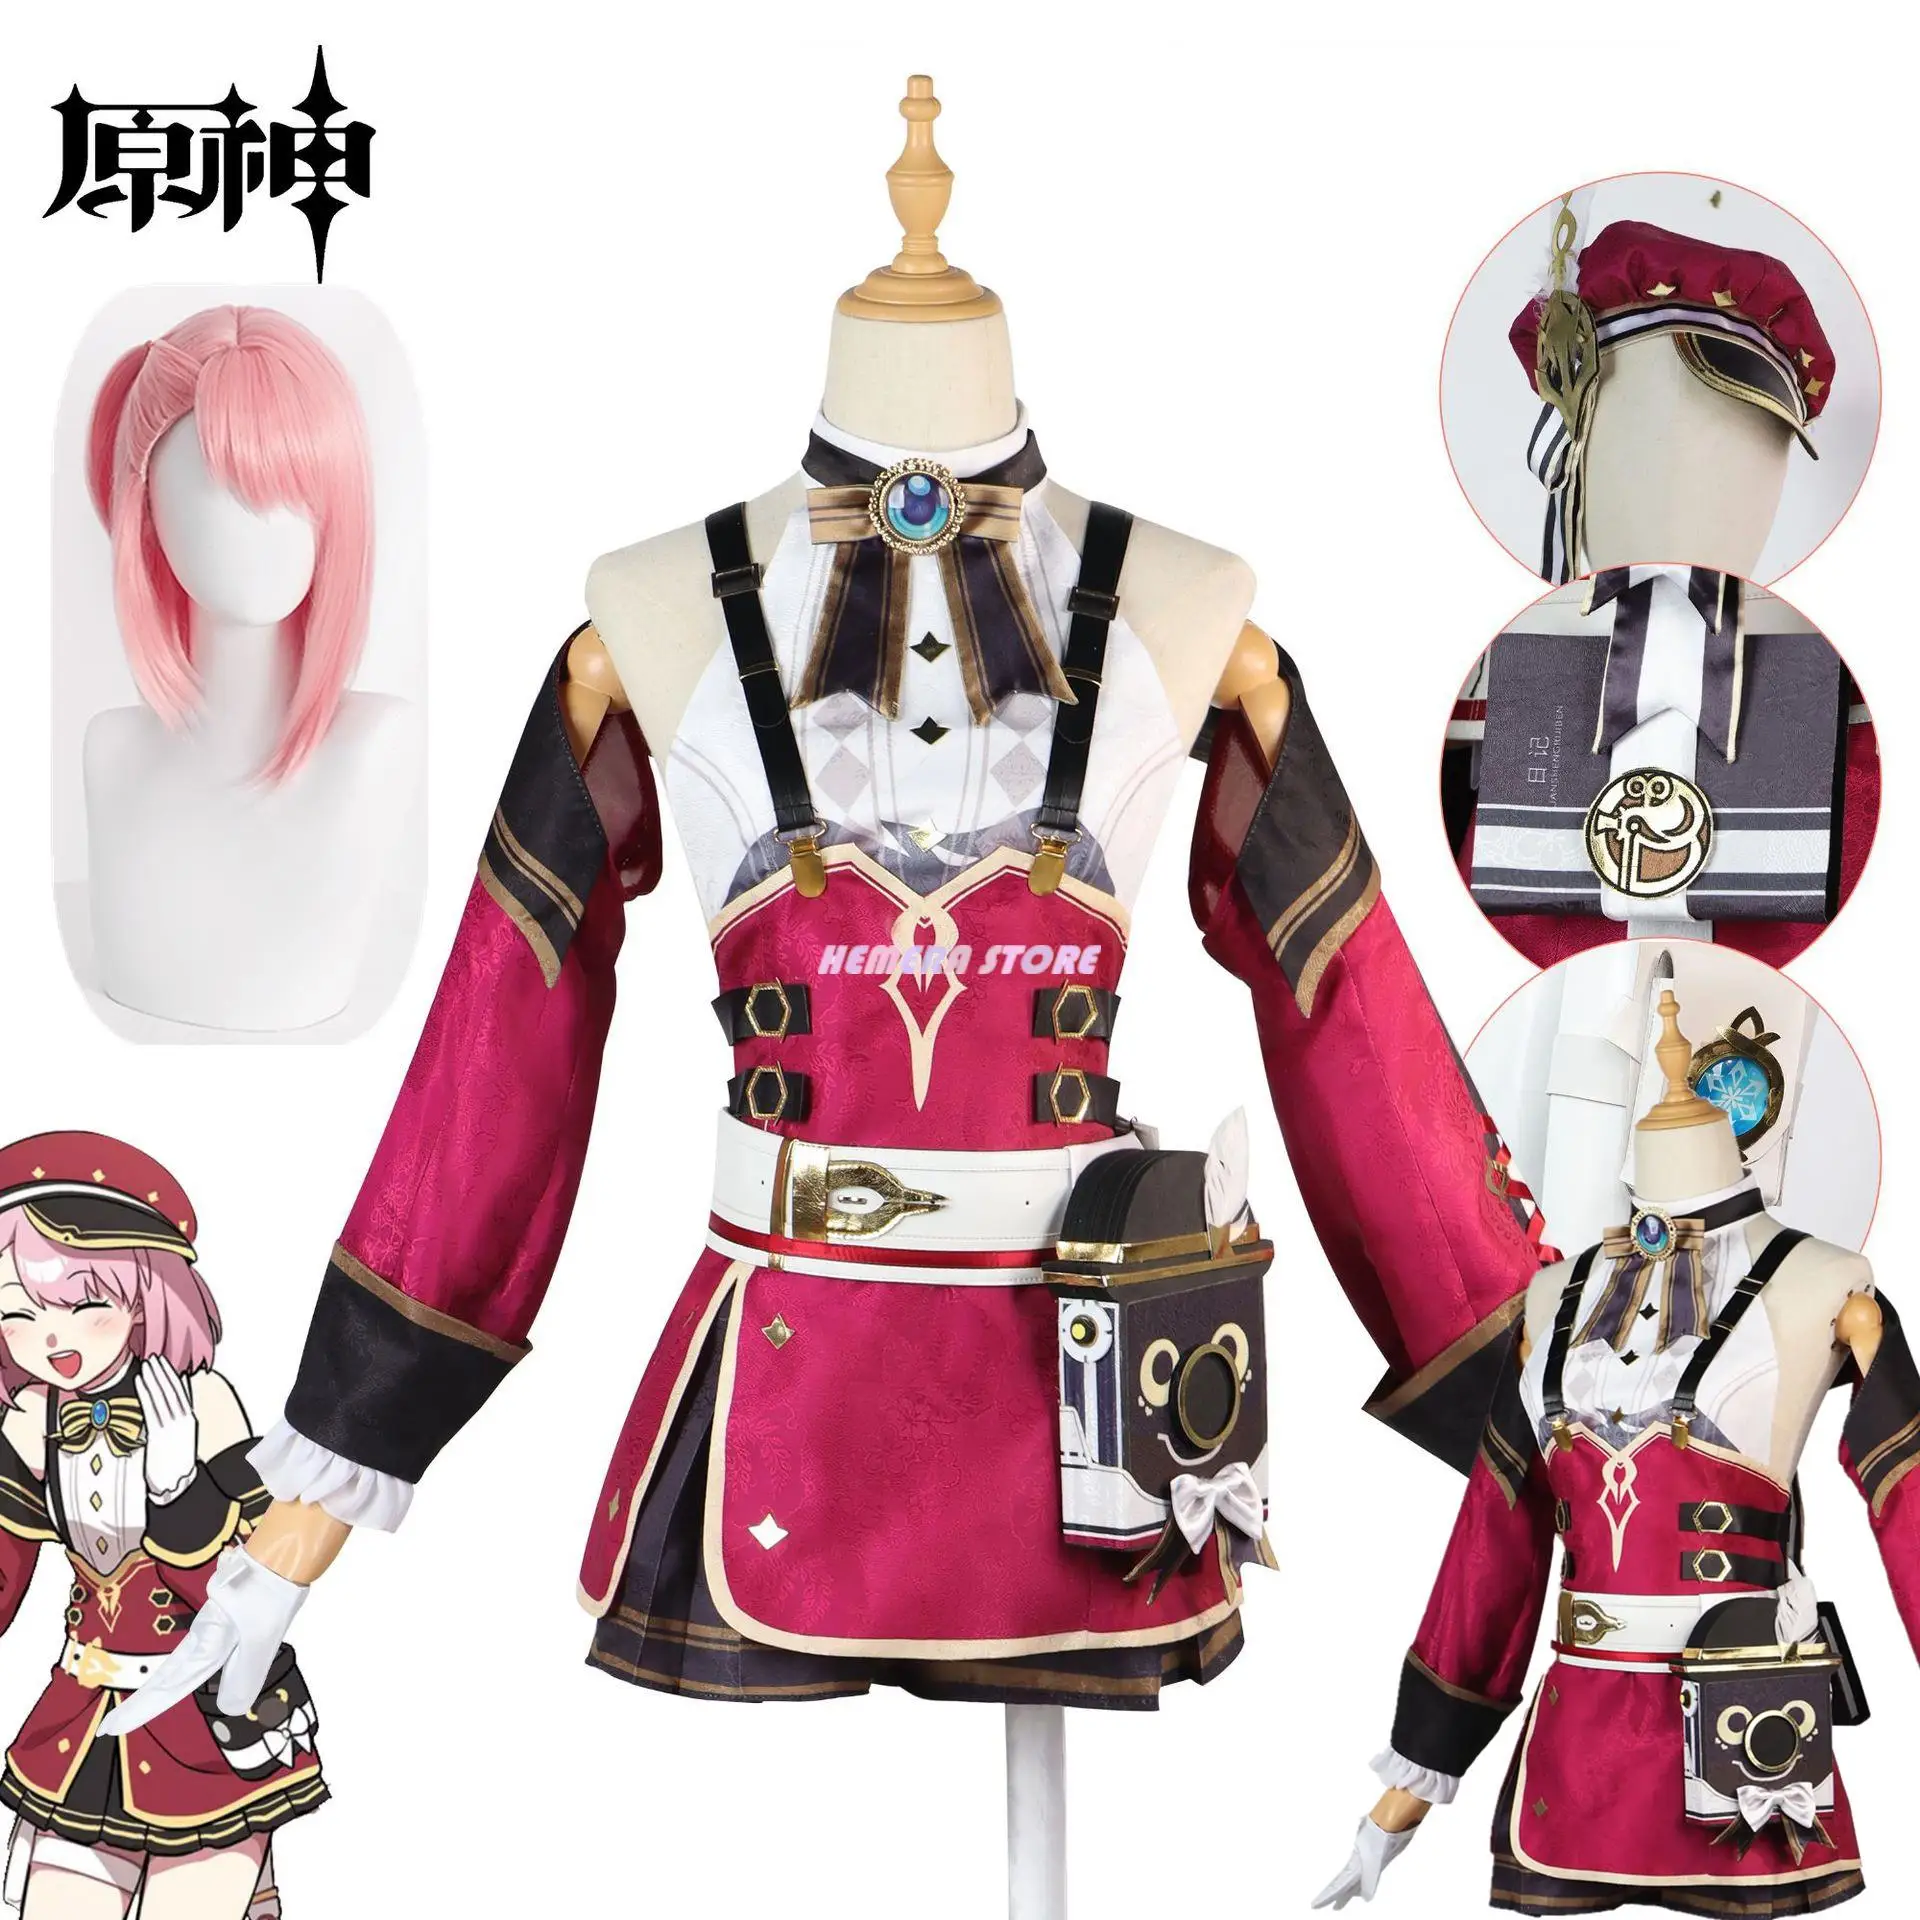 

Charlotte Cosplay Game Genshin Impact Costume For Women Uniform Full Set Anime Halloween Role Playing Party Carnival Costume